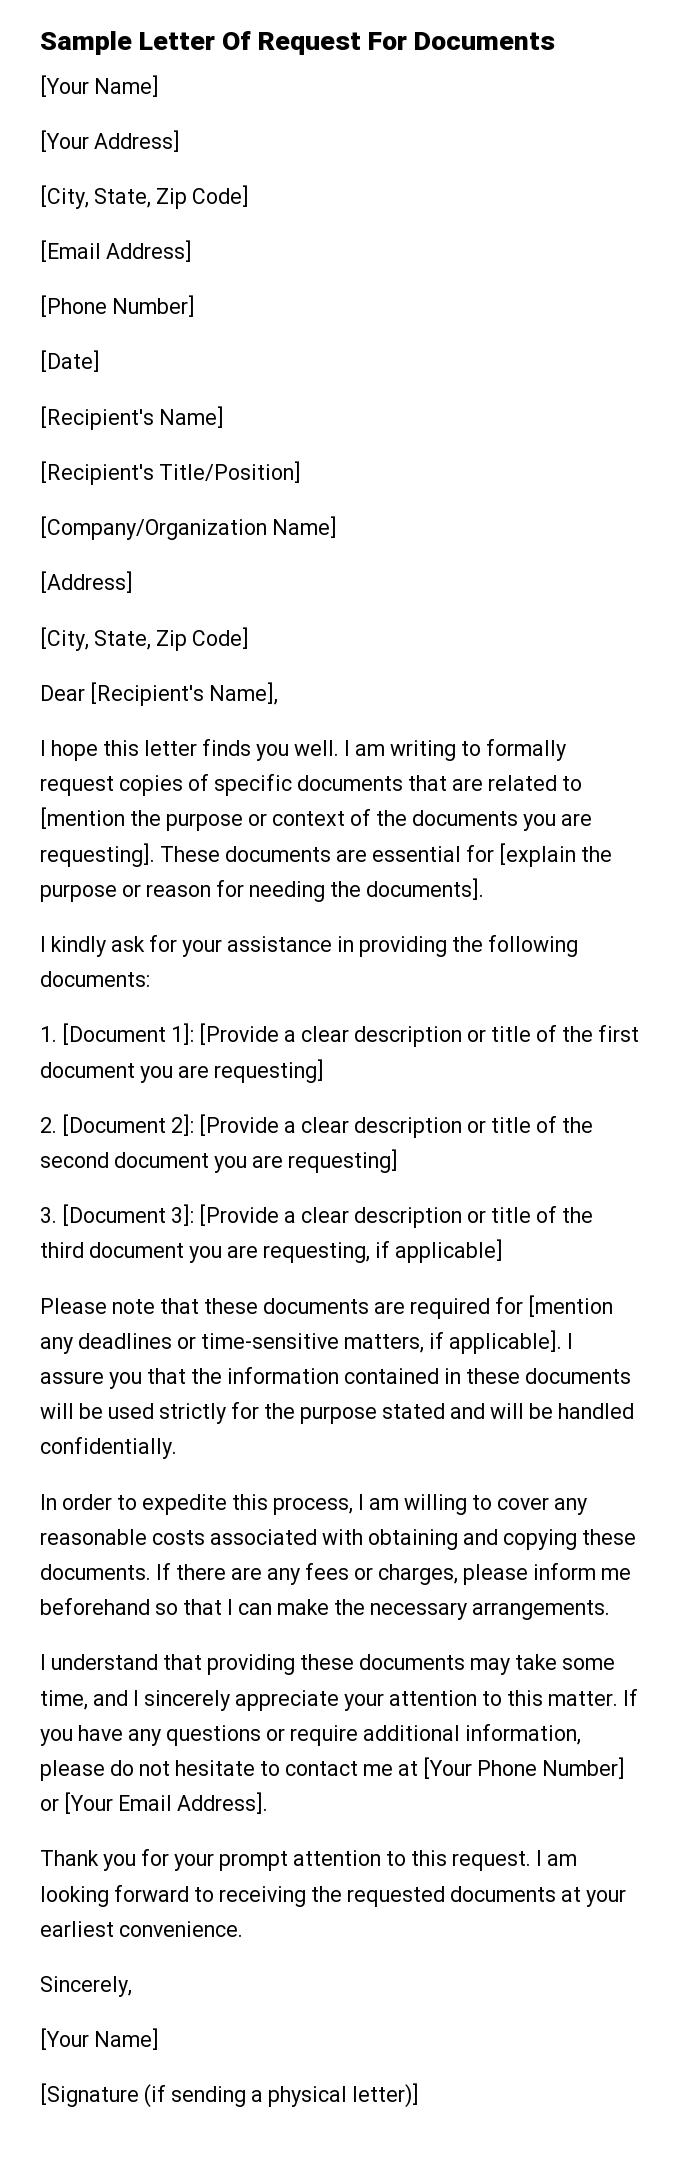 Sample Letter Of Request For Documents